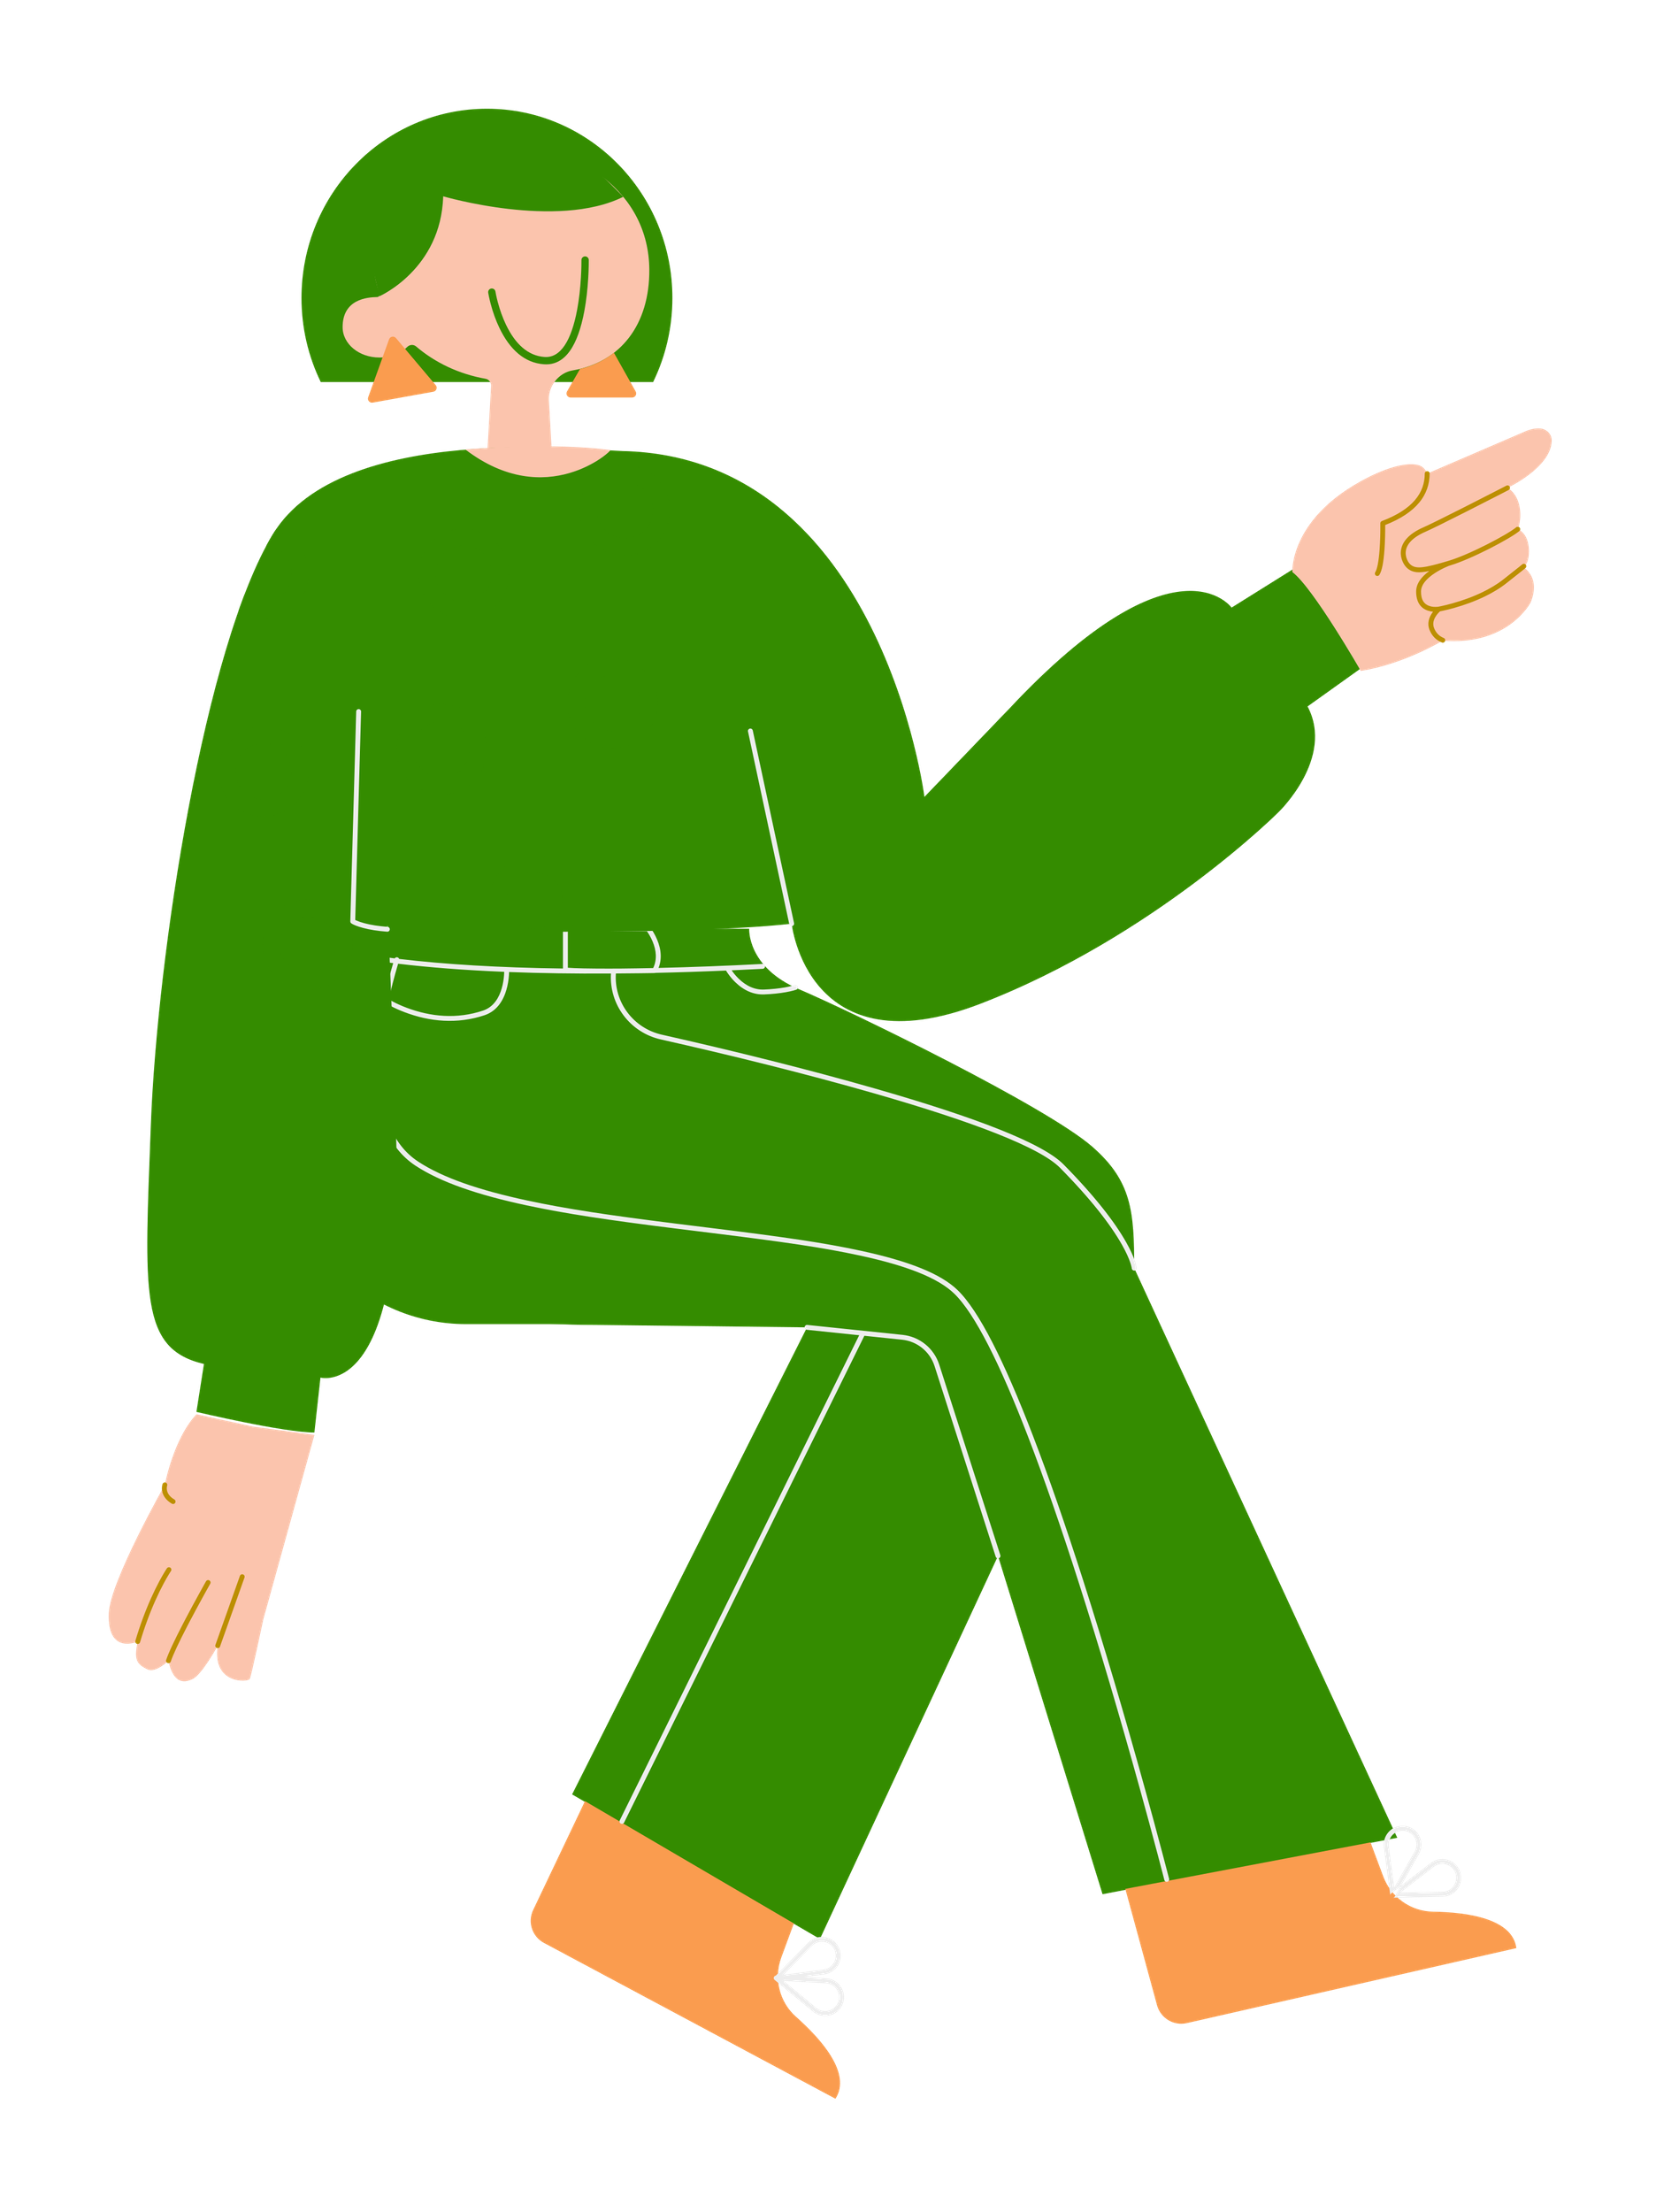 Peach Figure Sitting in Green and Pointing Up